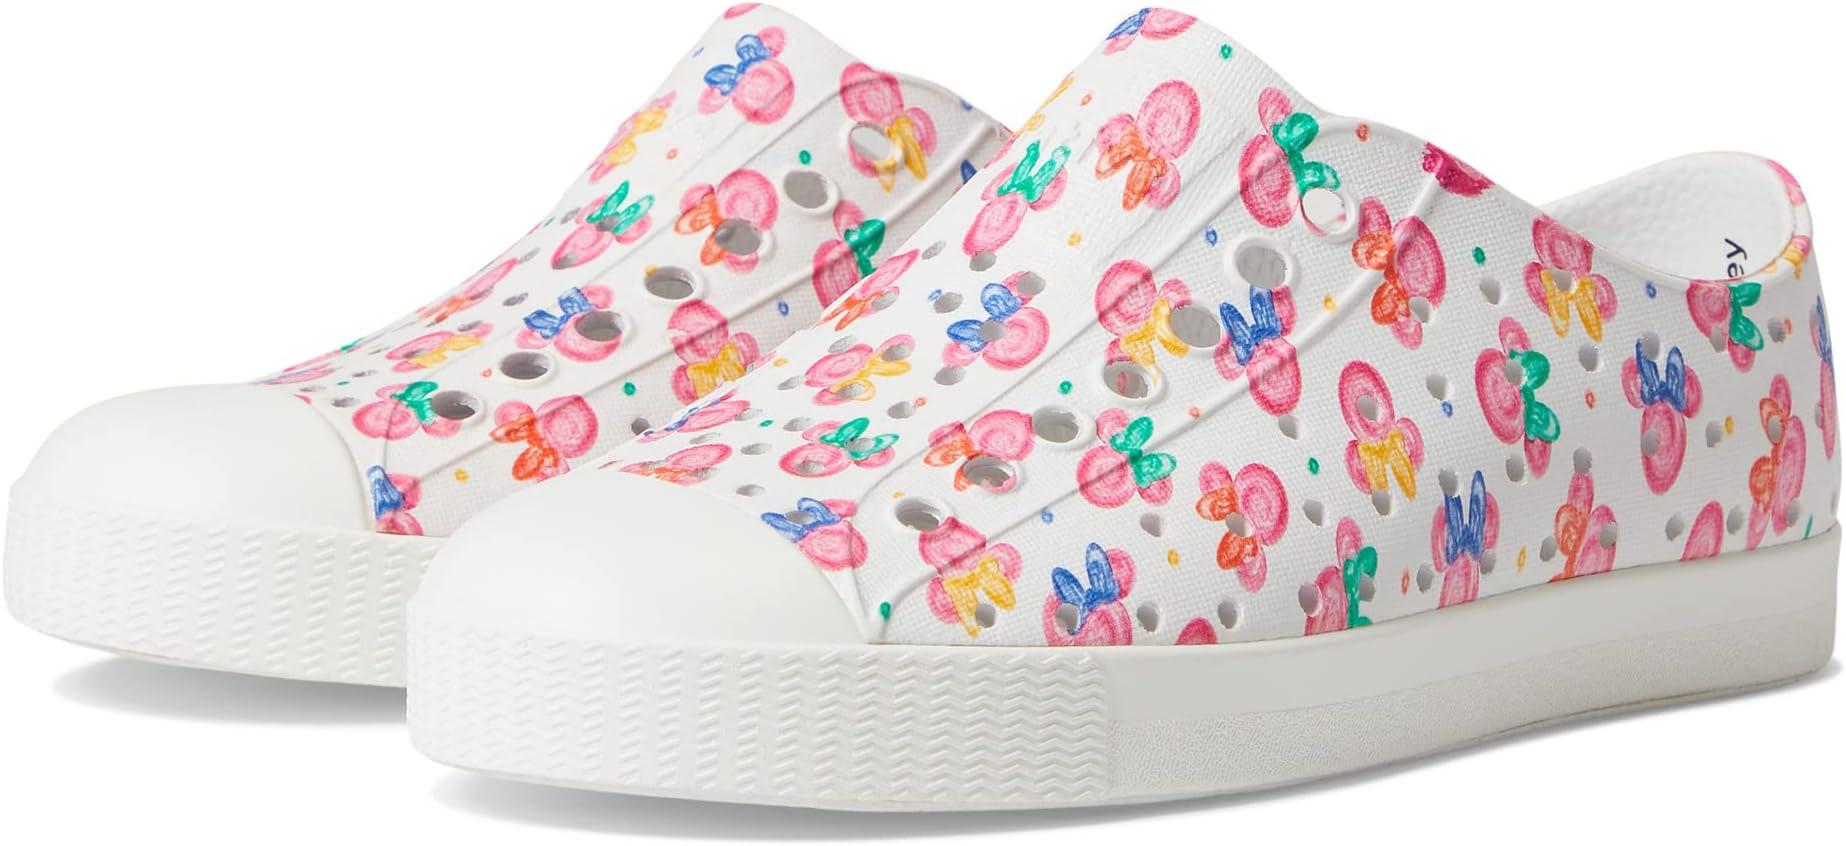 Кроссовки Jefferson Disney Print Native Shoes Kids, цвет Shell White/Shell White/Minnie Paint Drops All Over Print mesh small white shoes women s thin section 2021 summer new style velcro women s shoes ins tide shoes all match thick bottom